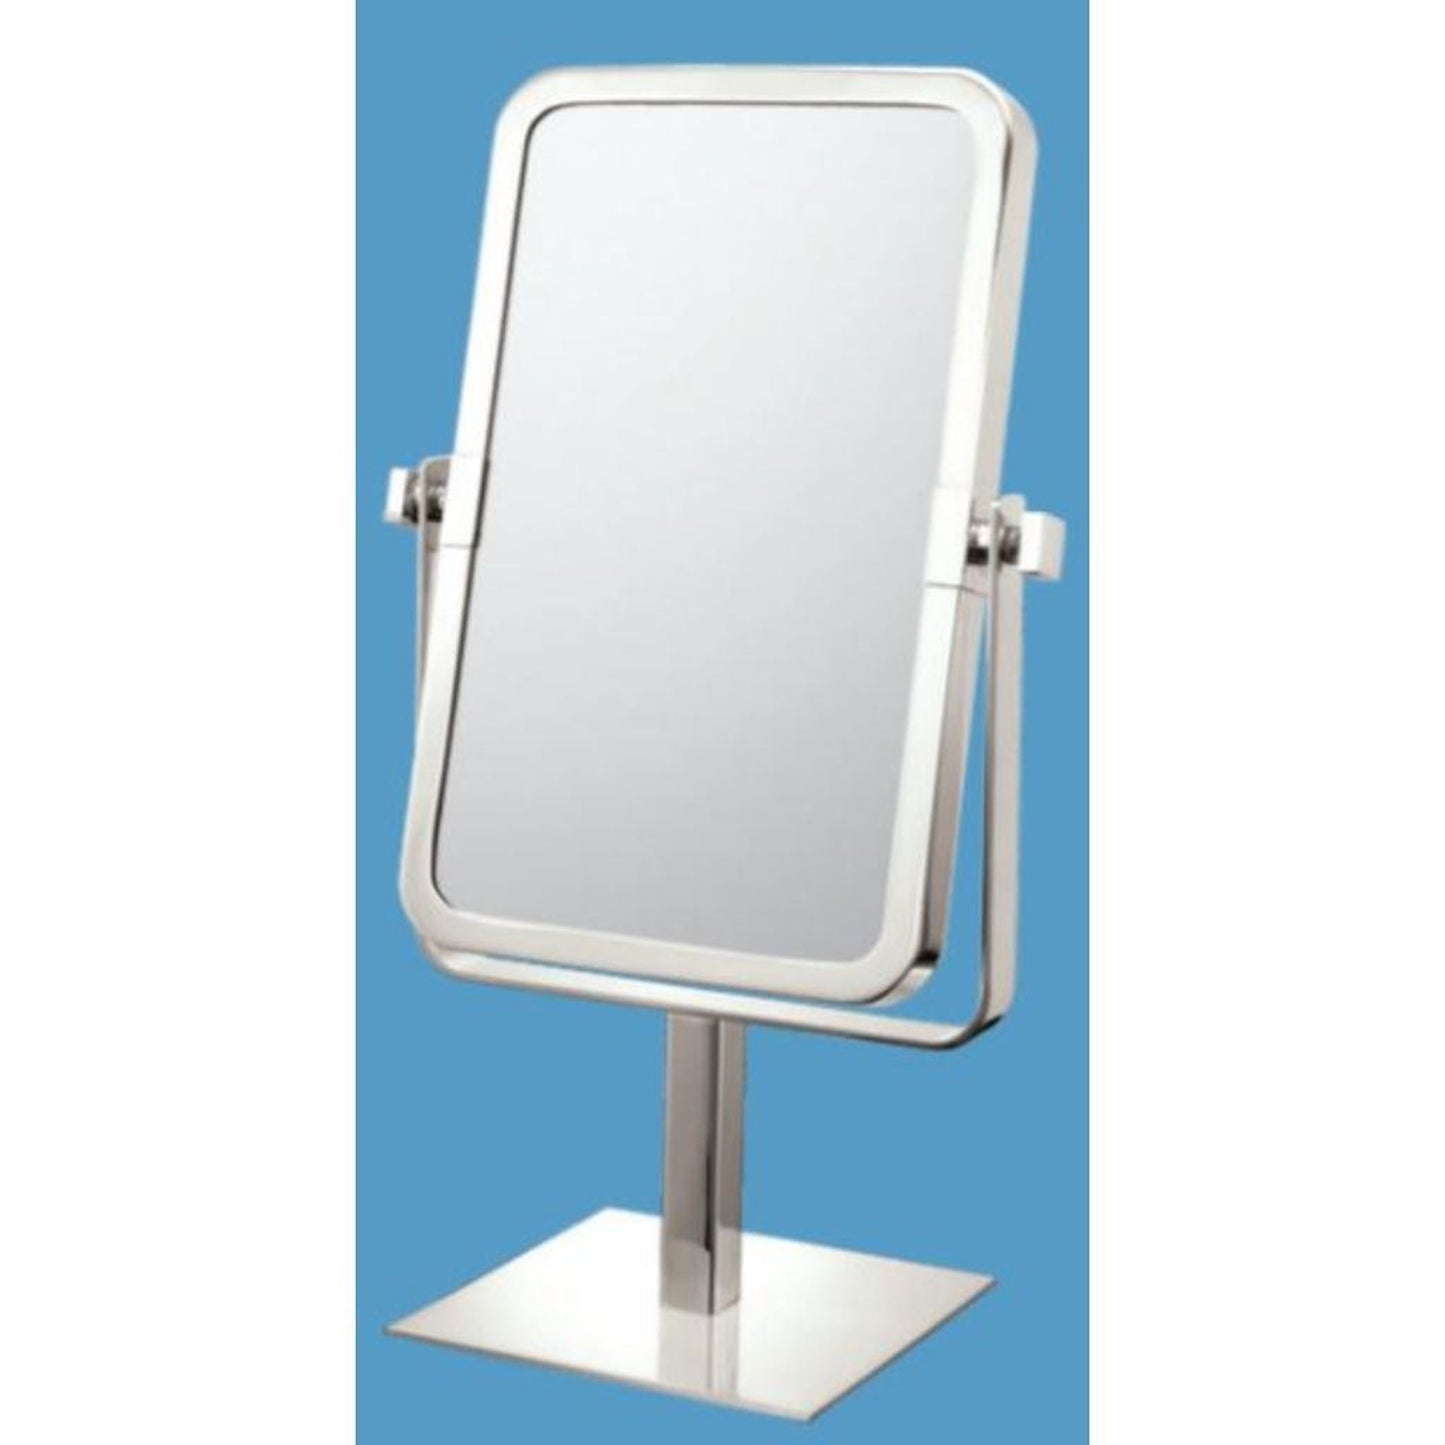 Aptations Mirror Image 8" x 14" Brushed Nickel Freestanding Rectangular 1X/3X Magnified Mirror With Square Base